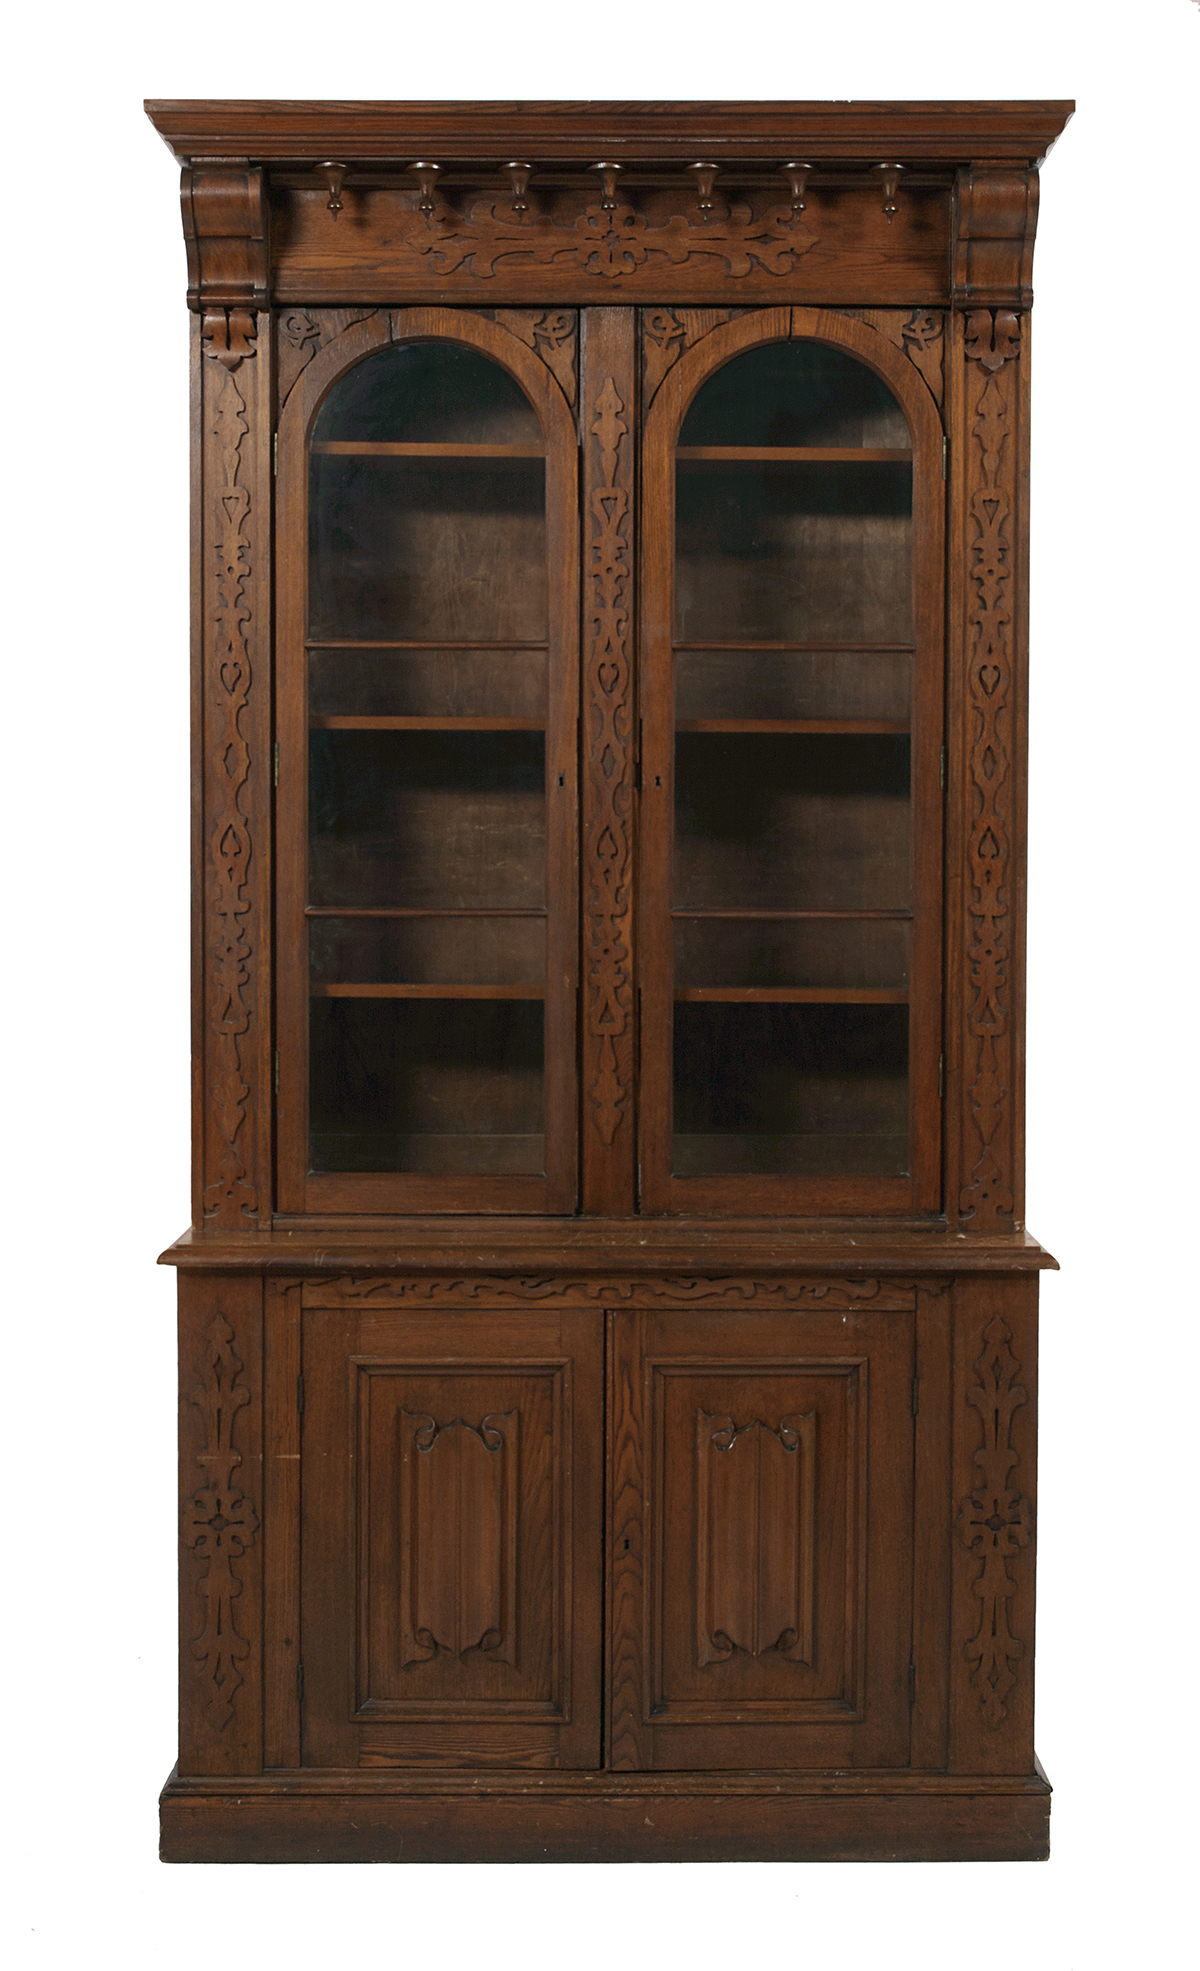 Pair of American Gothic Revival Bookcases - Image 2 of 6